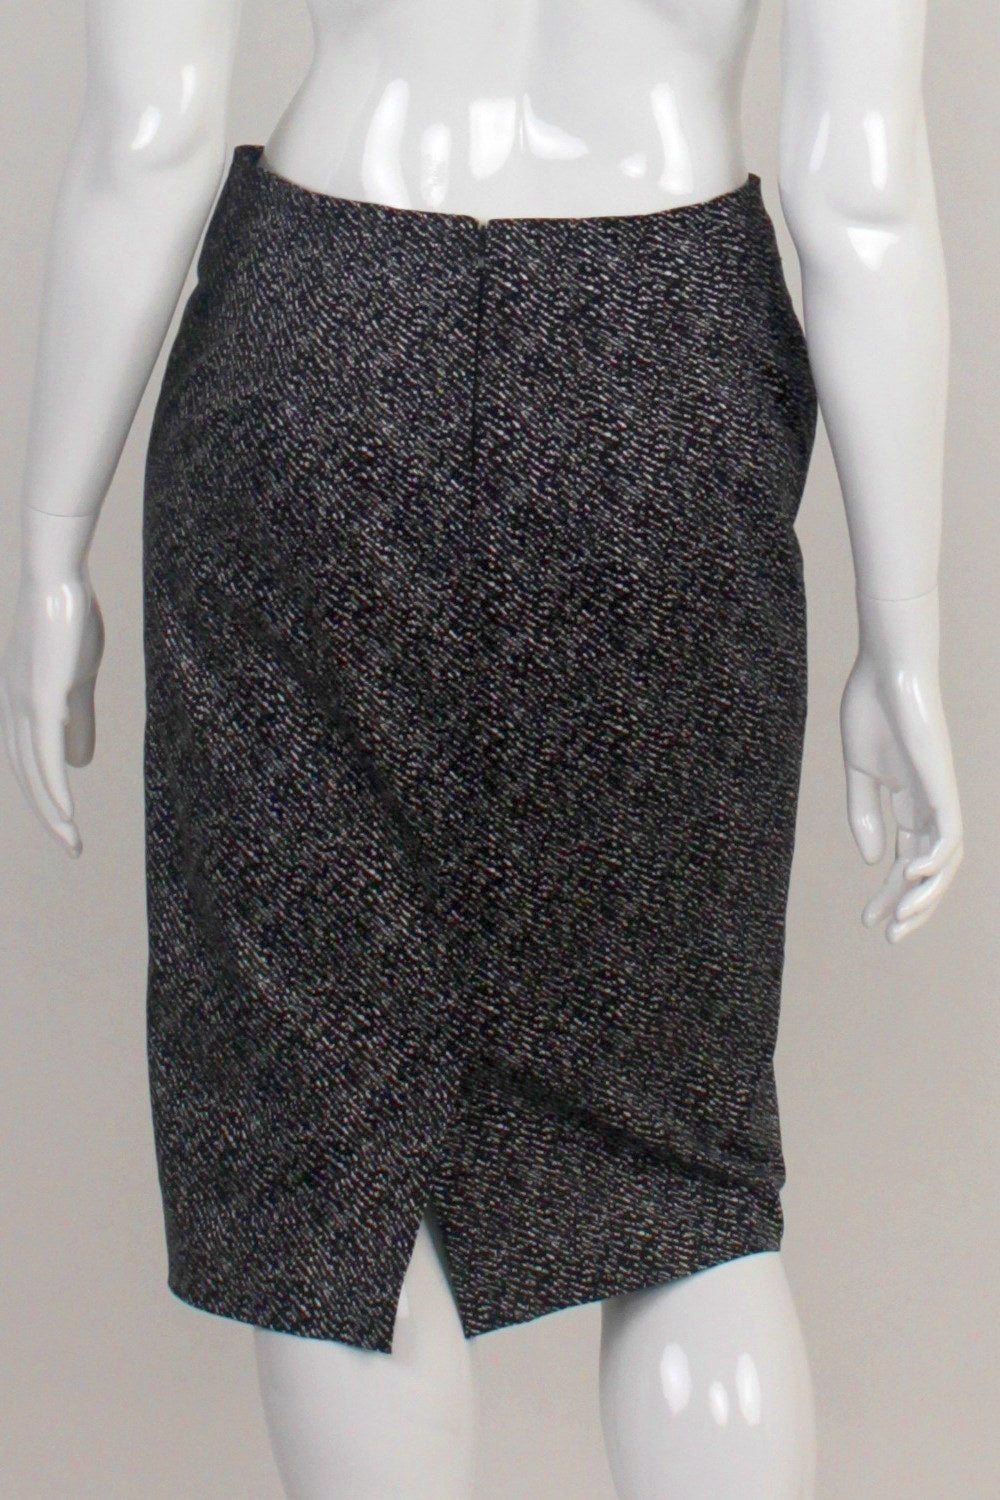 Country Road Black And White Patterned Pencil Skirt 14